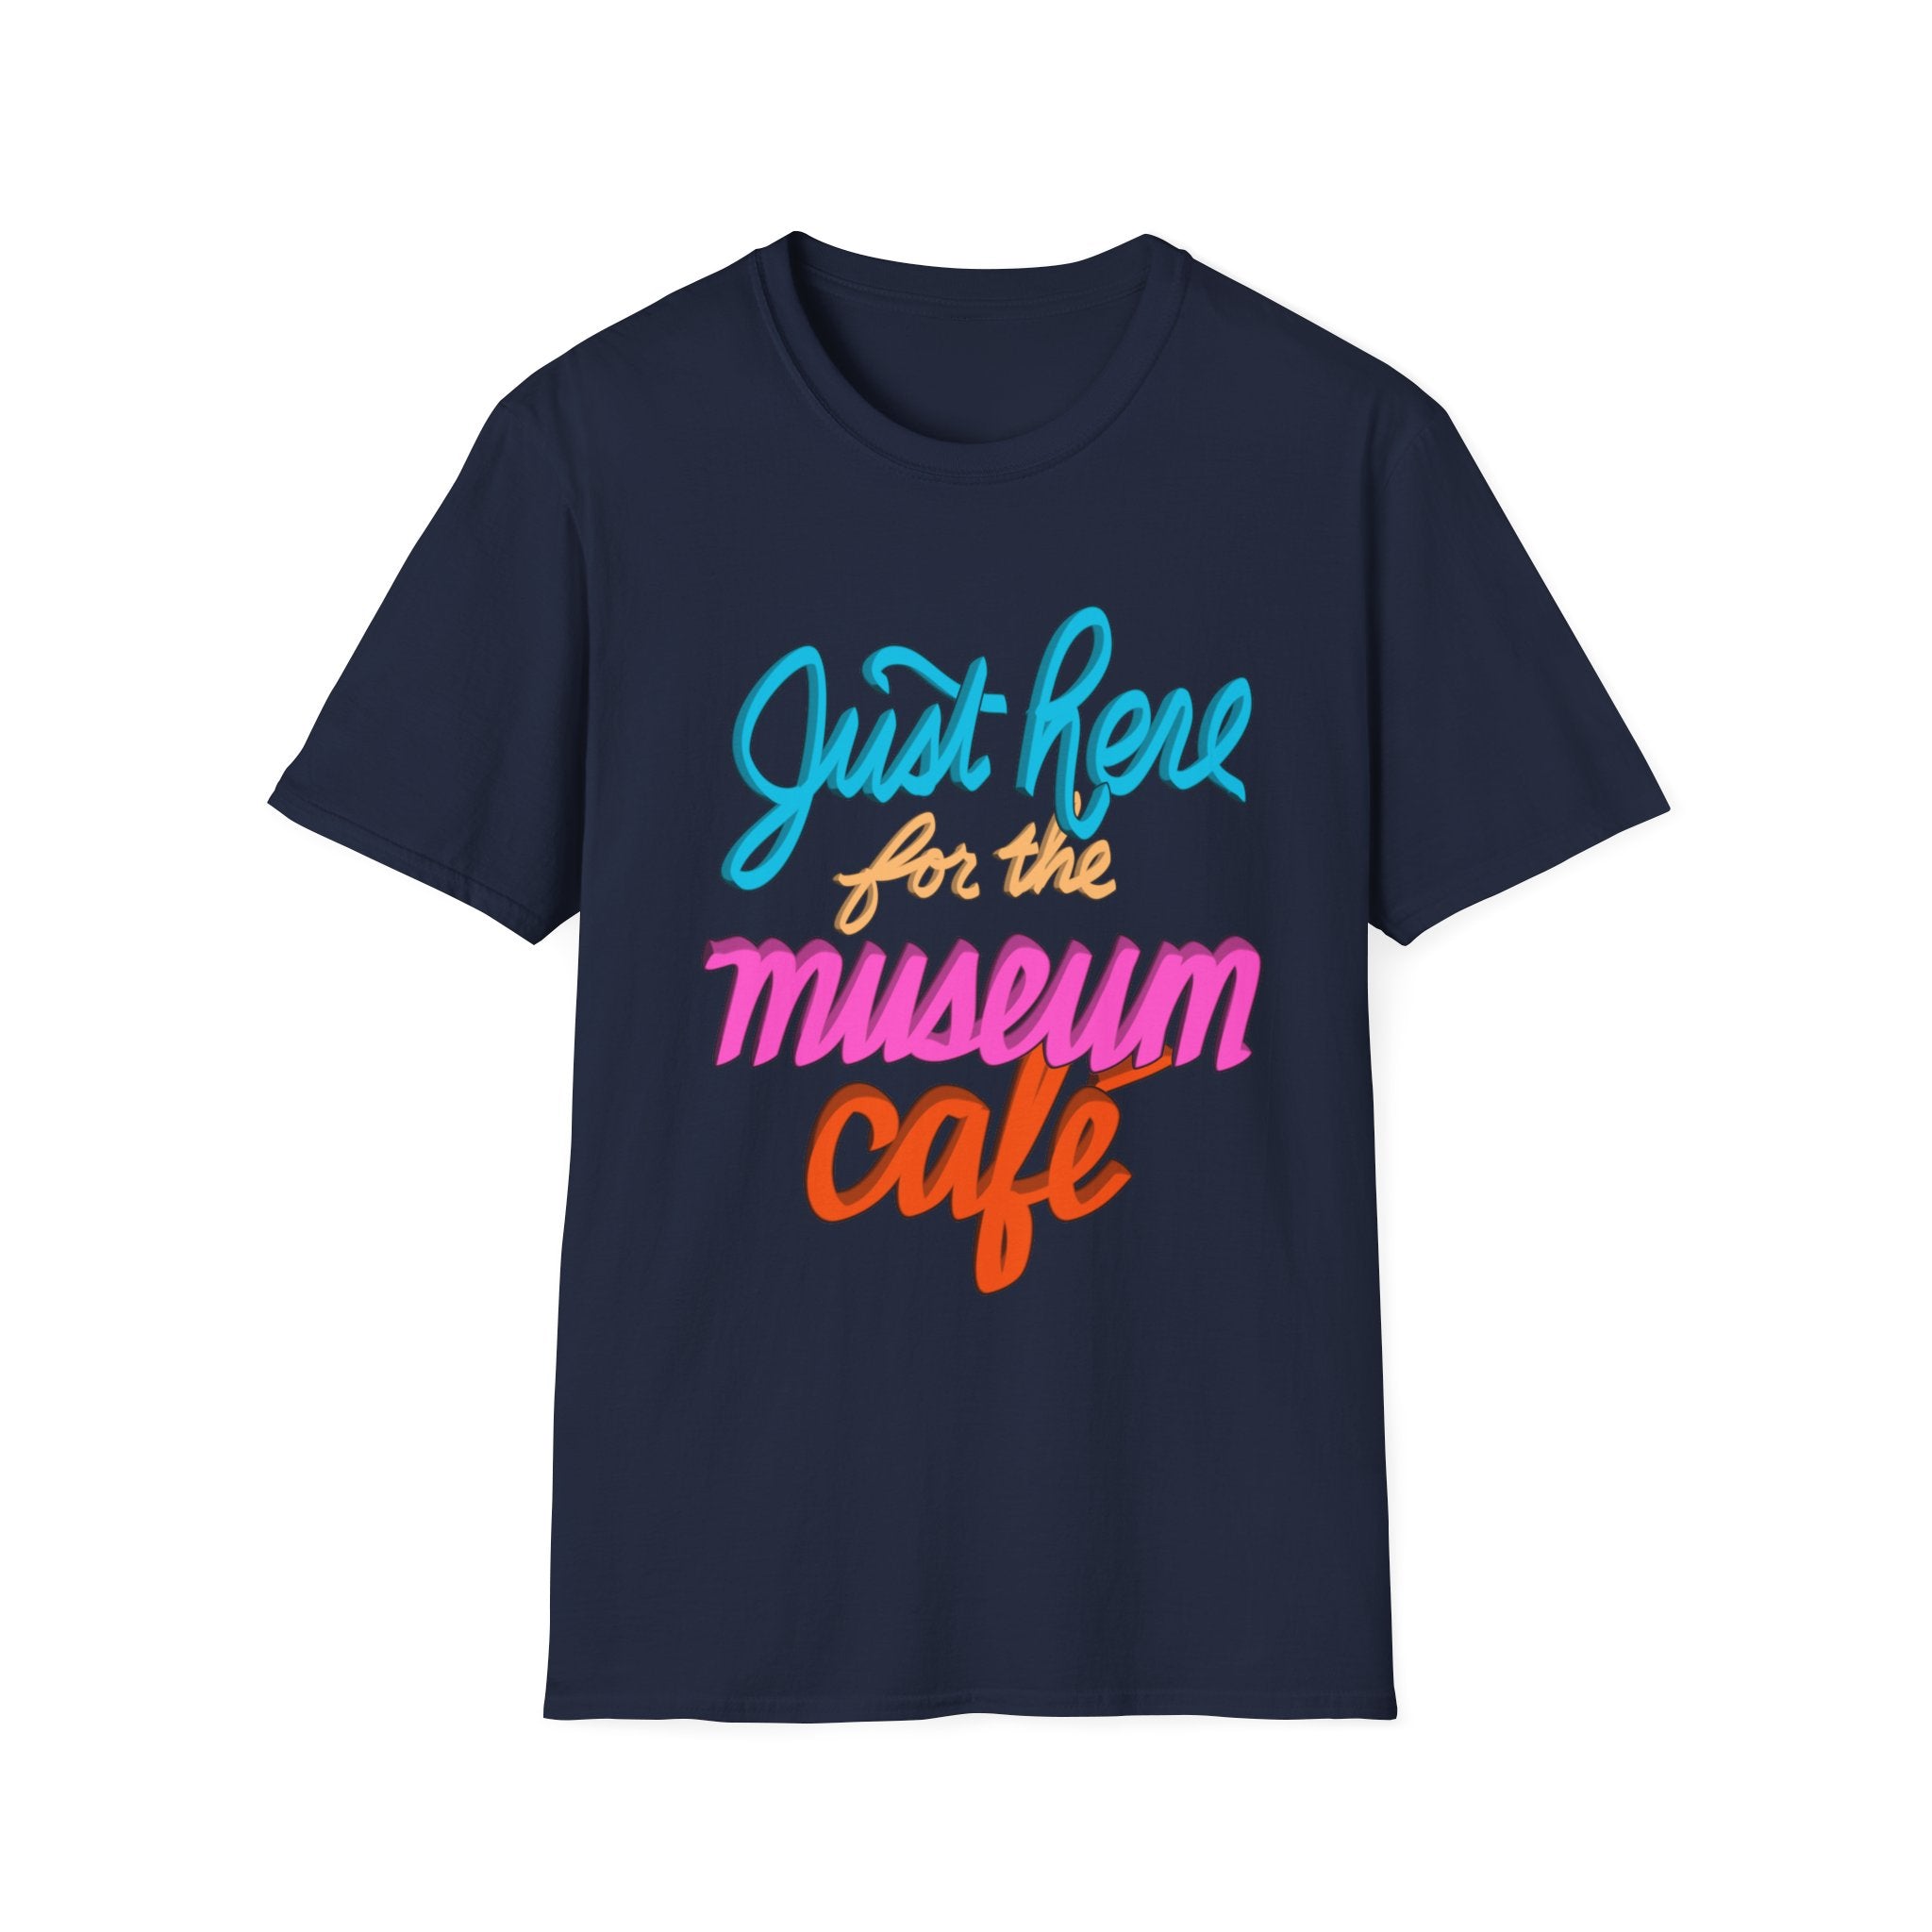 JUST HERE FOR THE MUSEUM CAFE Unisex Softstyle T-Shirt